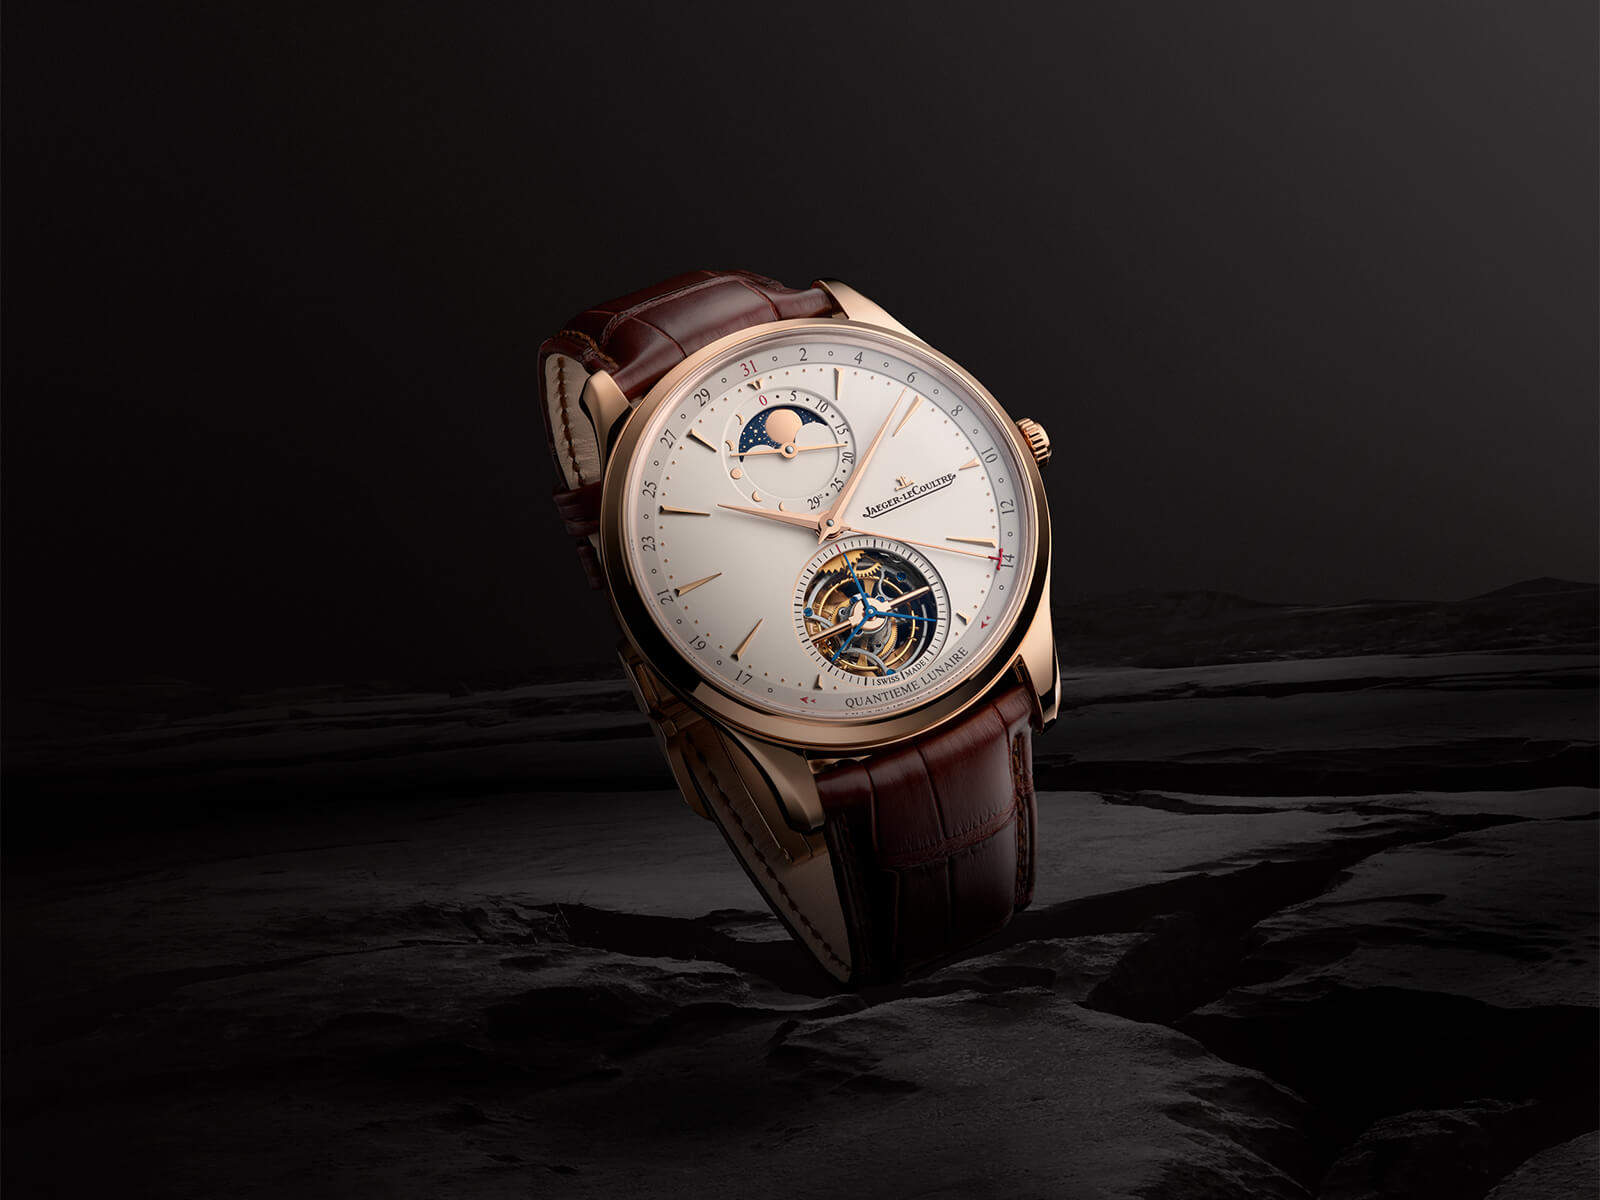 Shop the Jaeger-LeCoultre Master collection here.